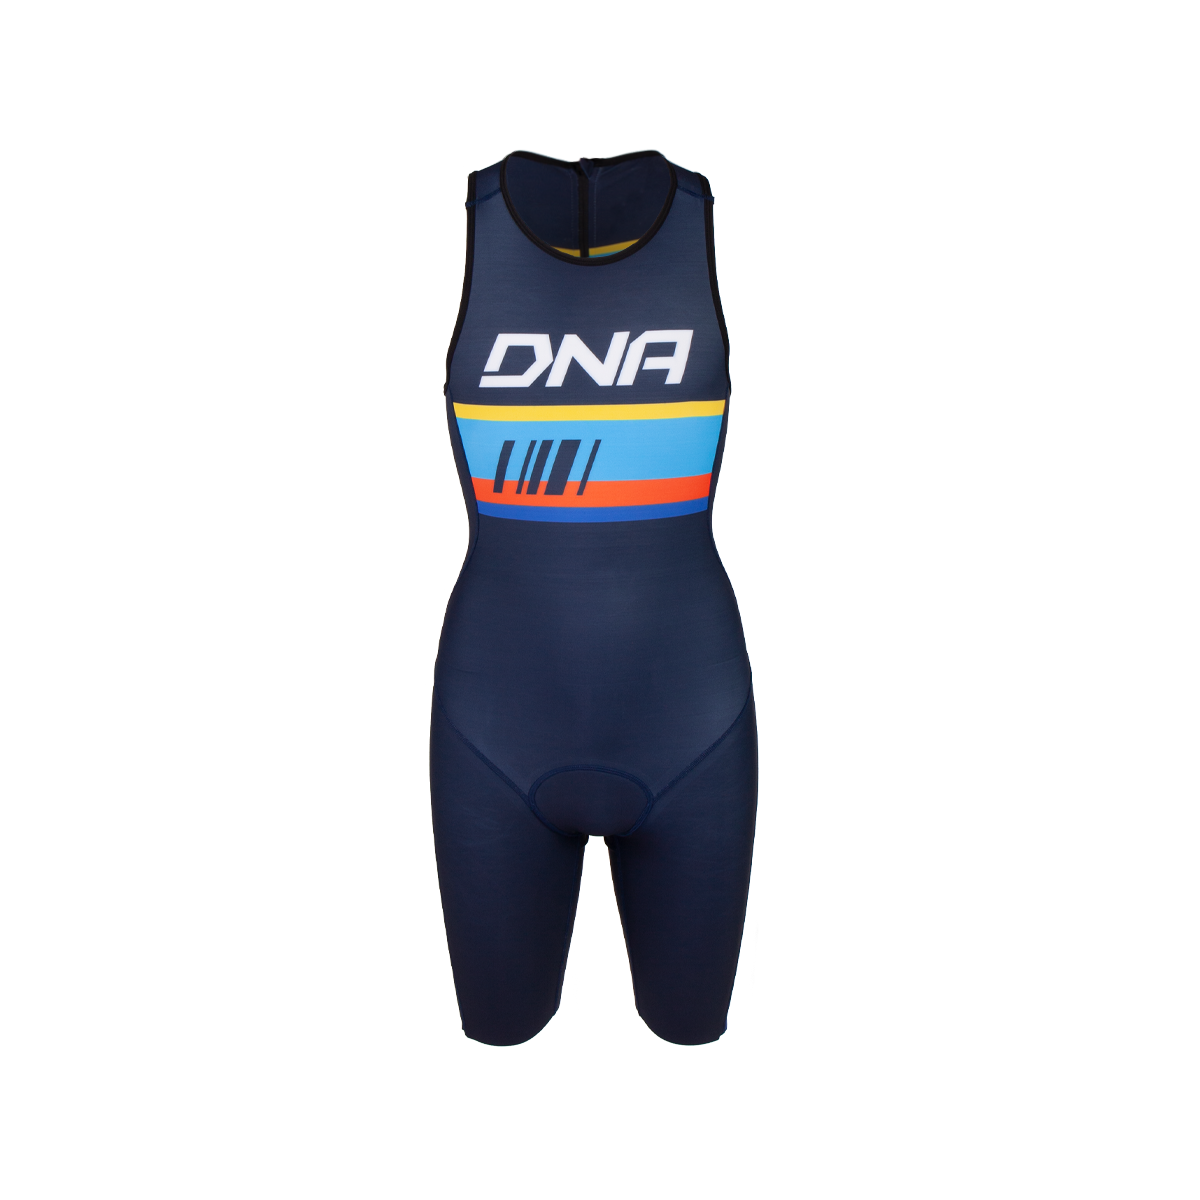 Triathlon kit and trisuits for men and women